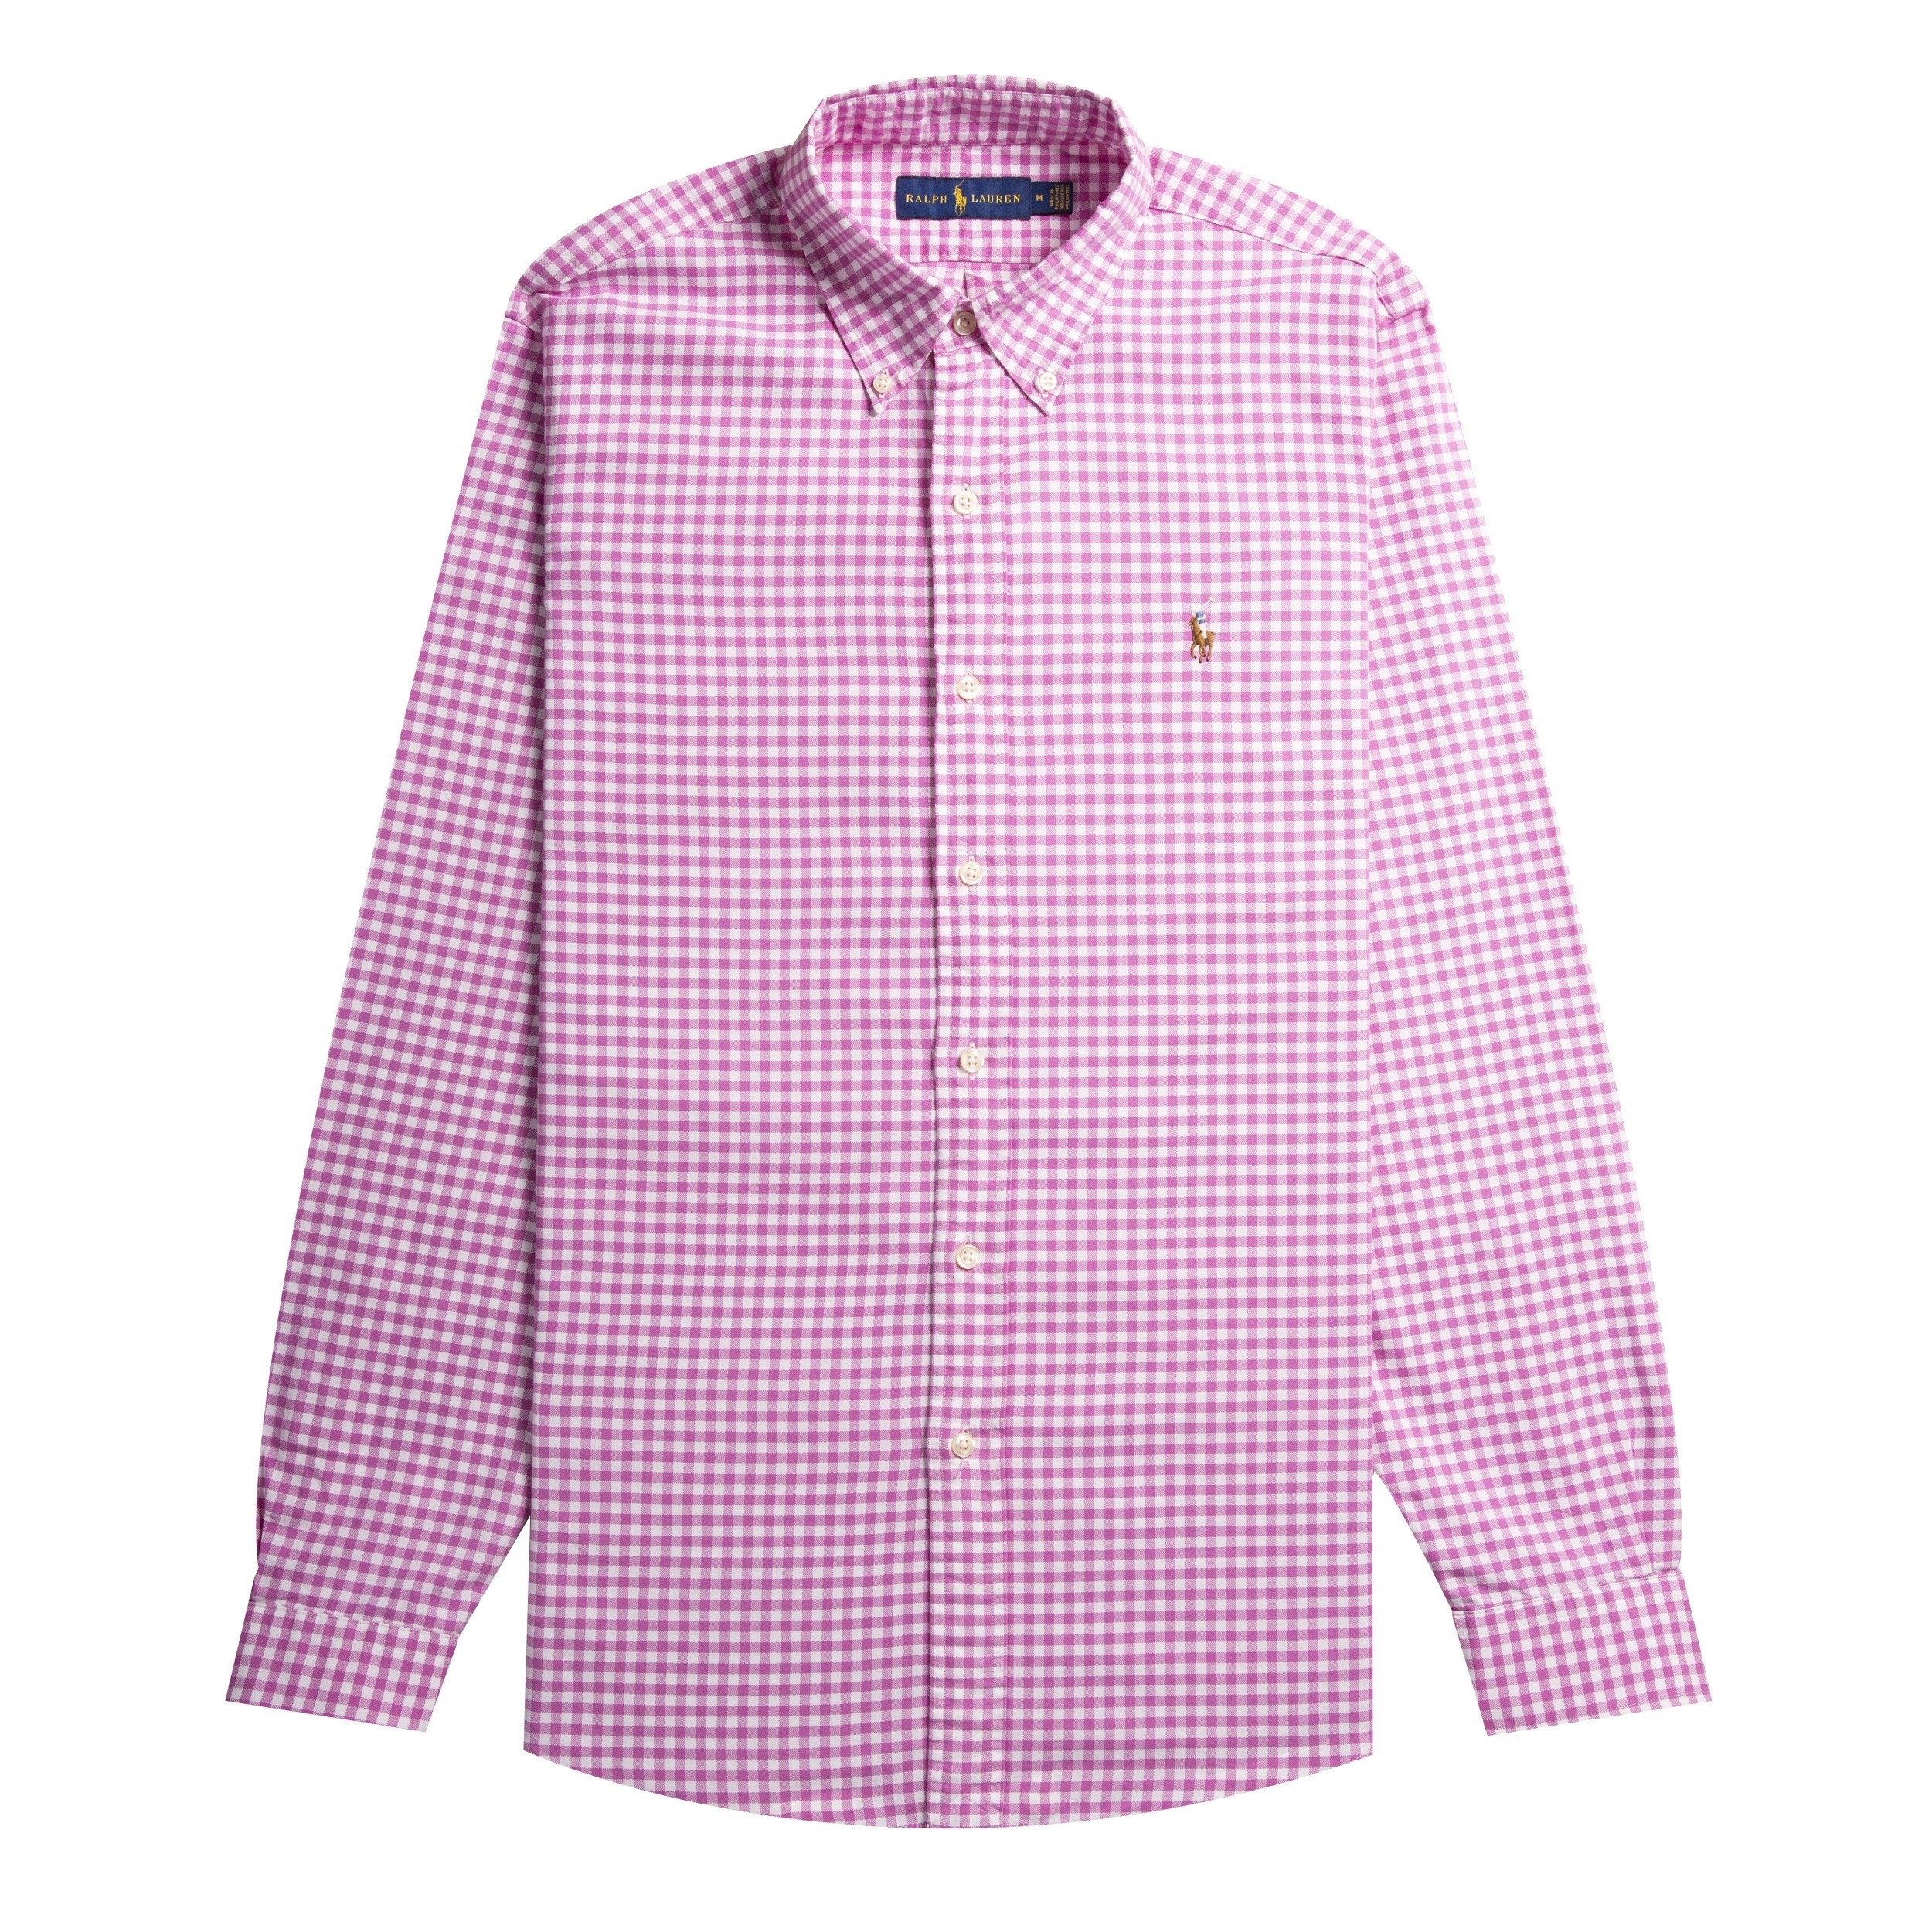 Polo Ralph Lauren Classic Fit Gingham Shirt Pink & White